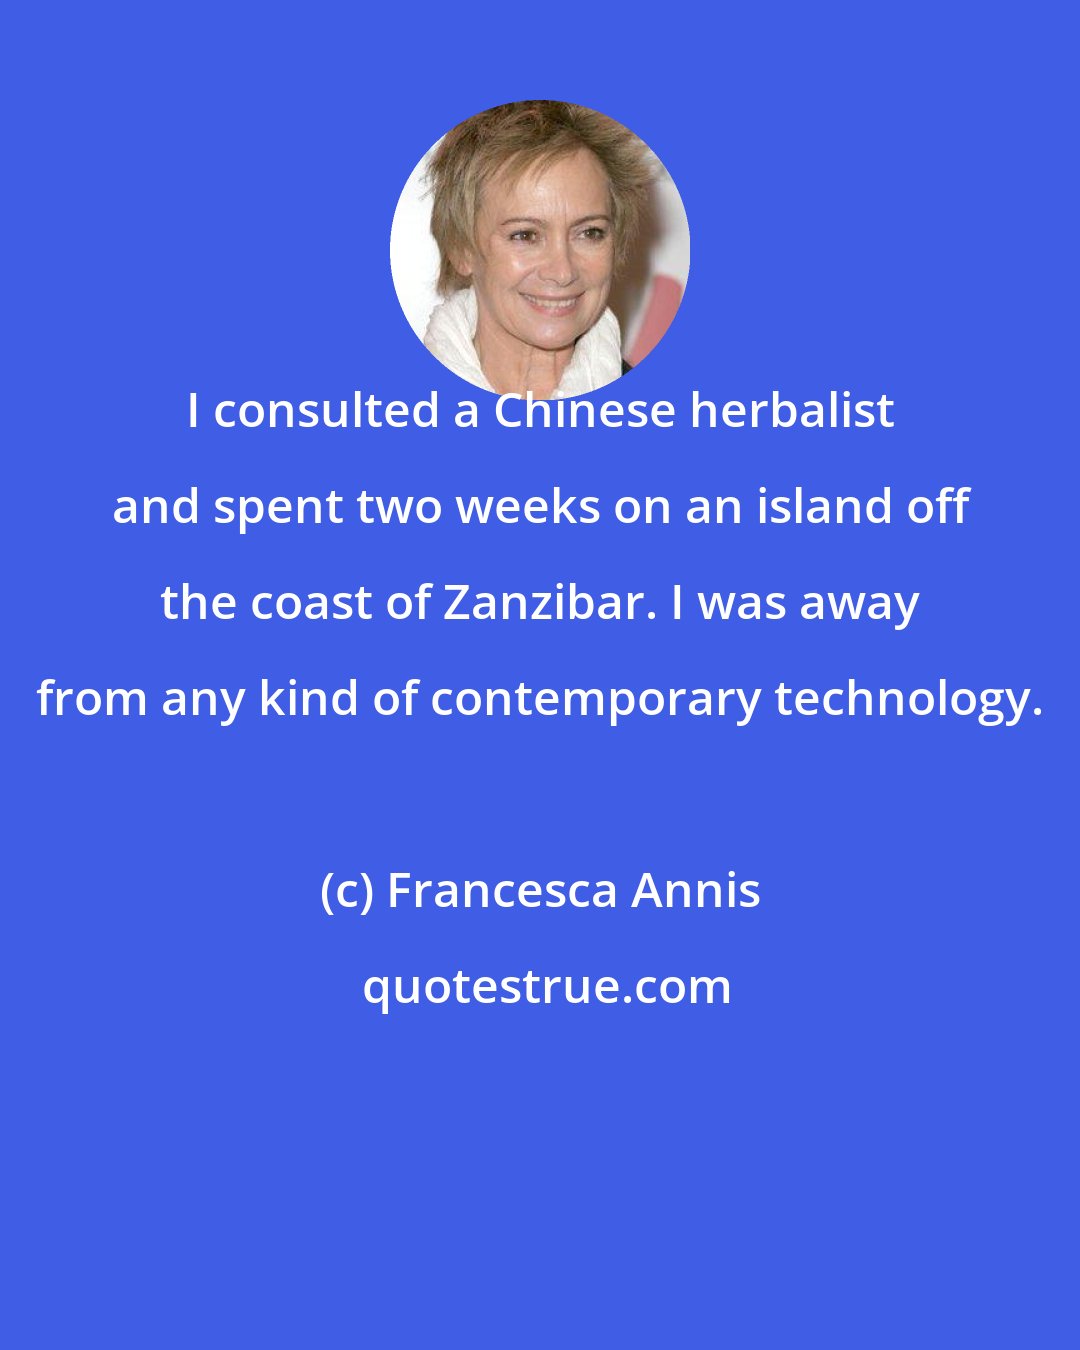 Francesca Annis: I consulted a Chinese herbalist and spent two weeks on an island off the coast of Zanzibar. I was away from any kind of contemporary technology.